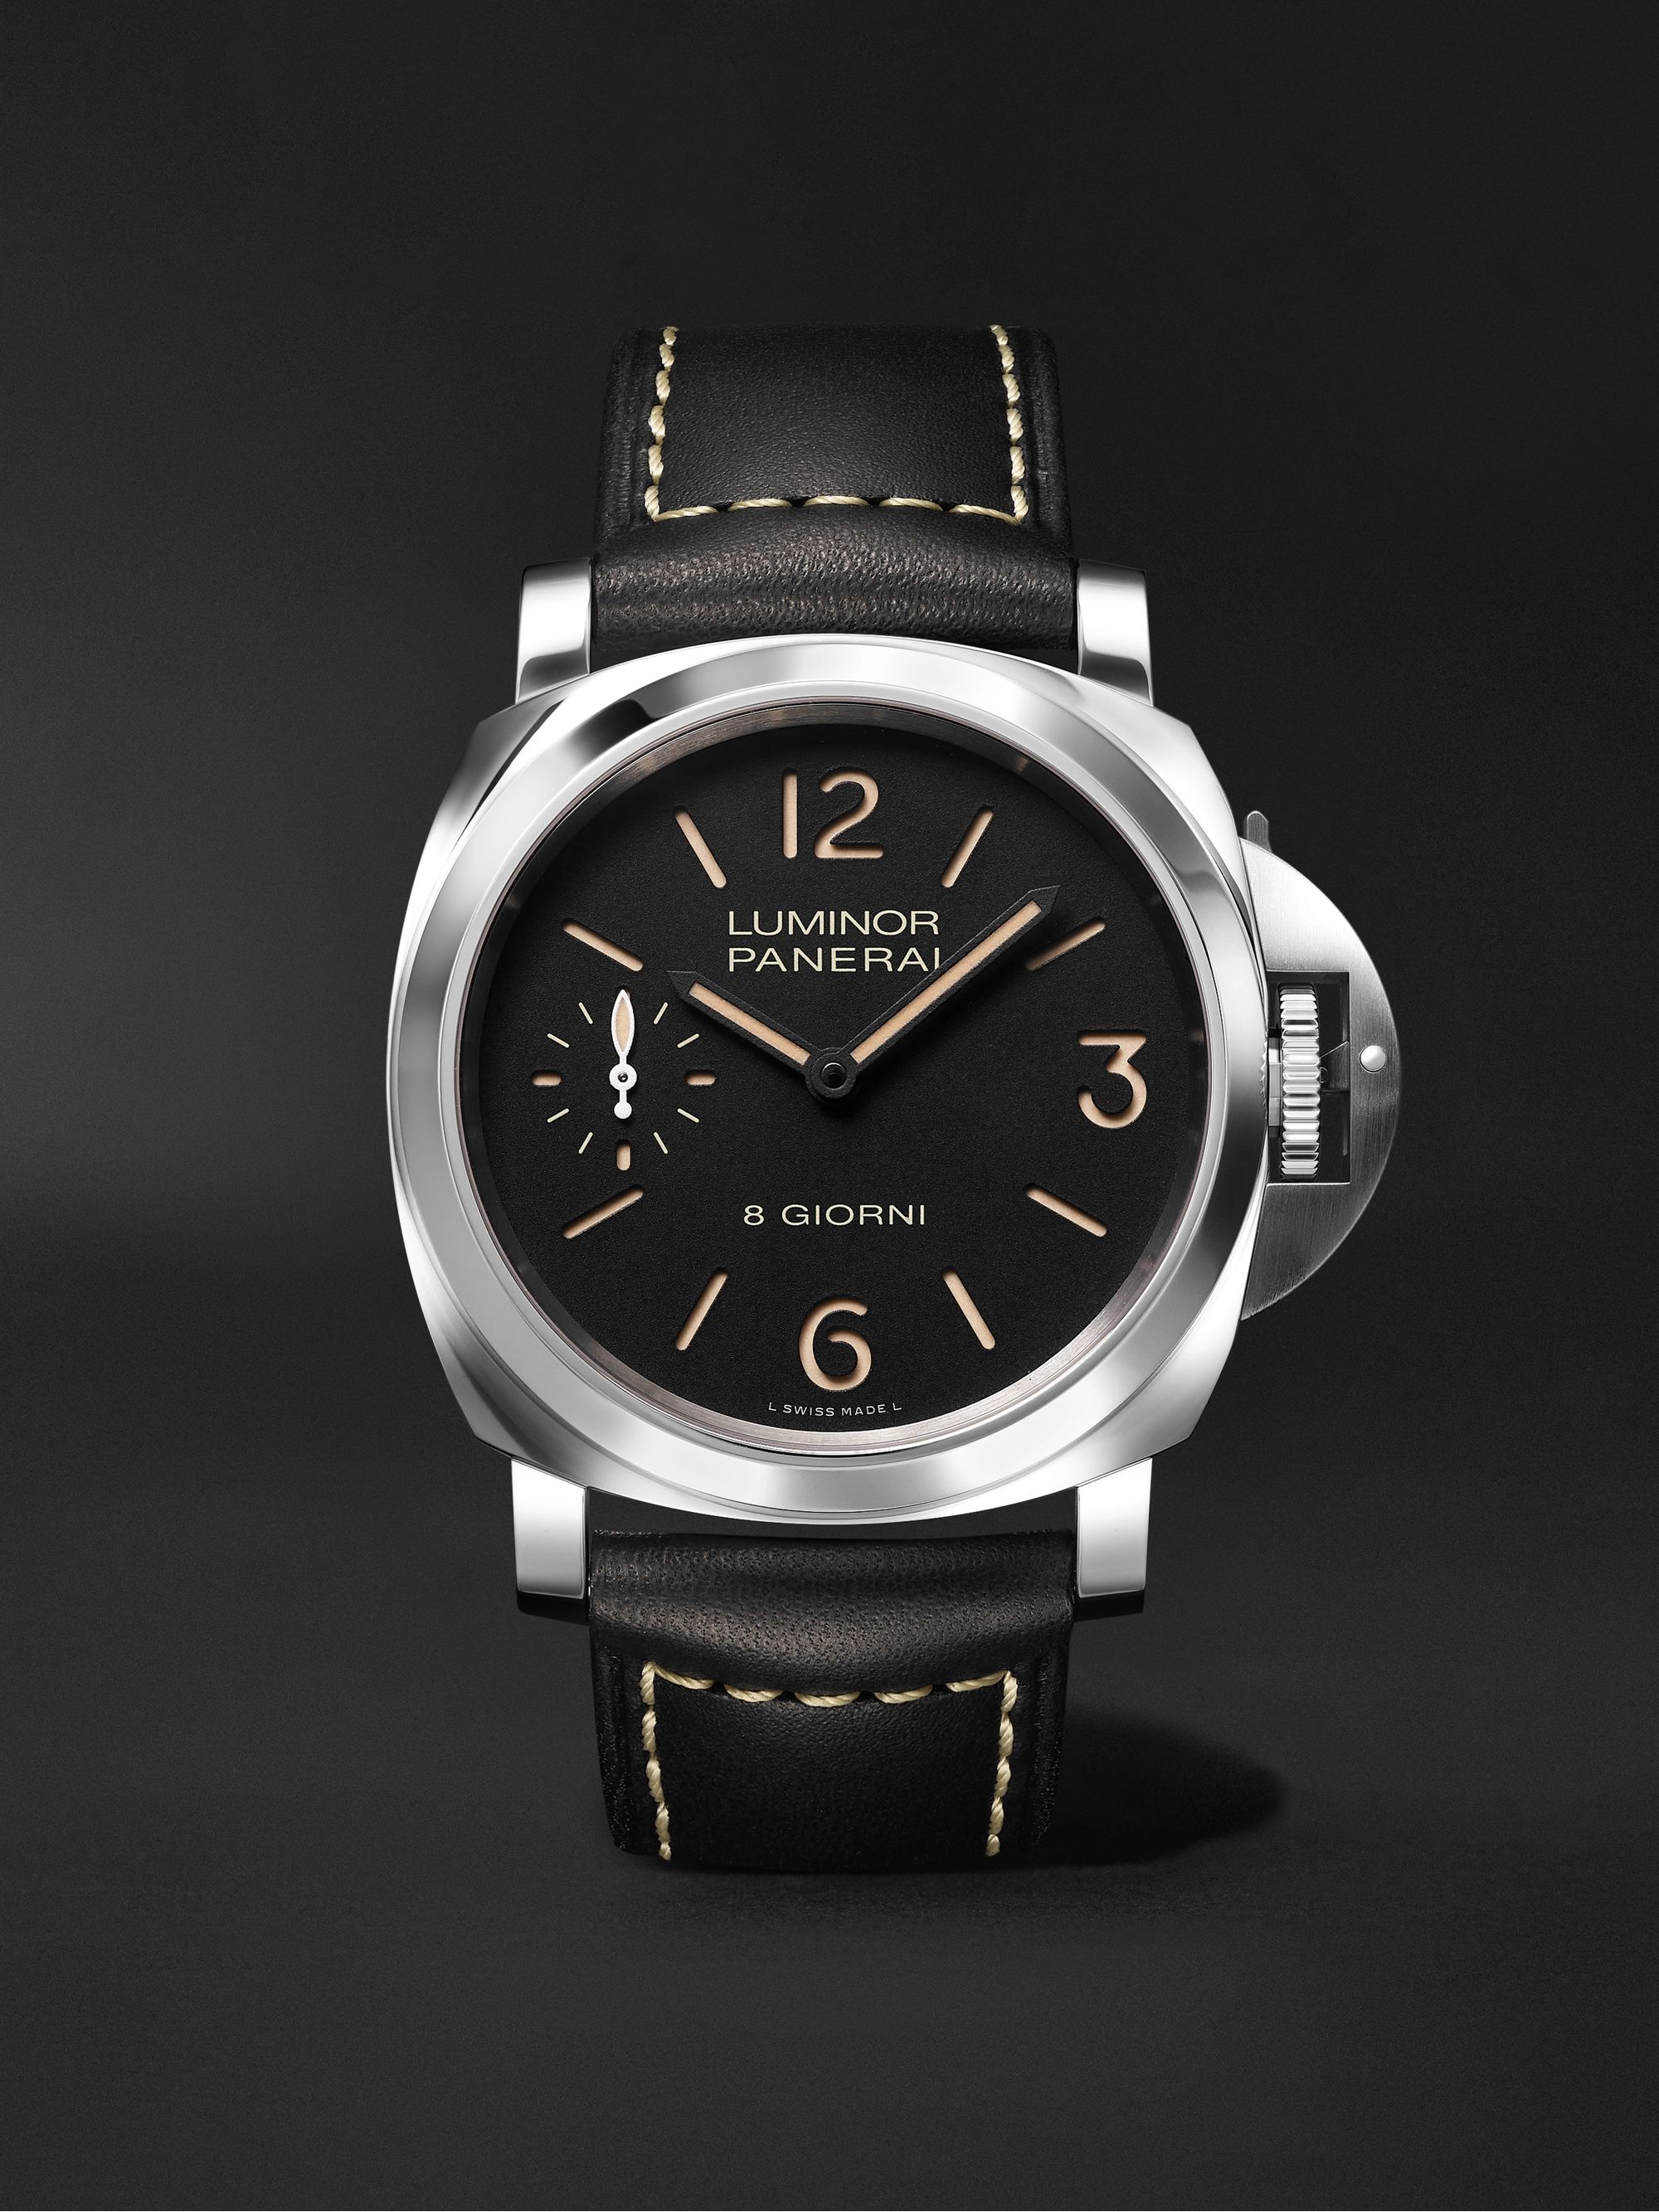 PANERAI Luminor 8 Days 44mm Stainless Steel and Leather Watch, Ref. No. PAM00915